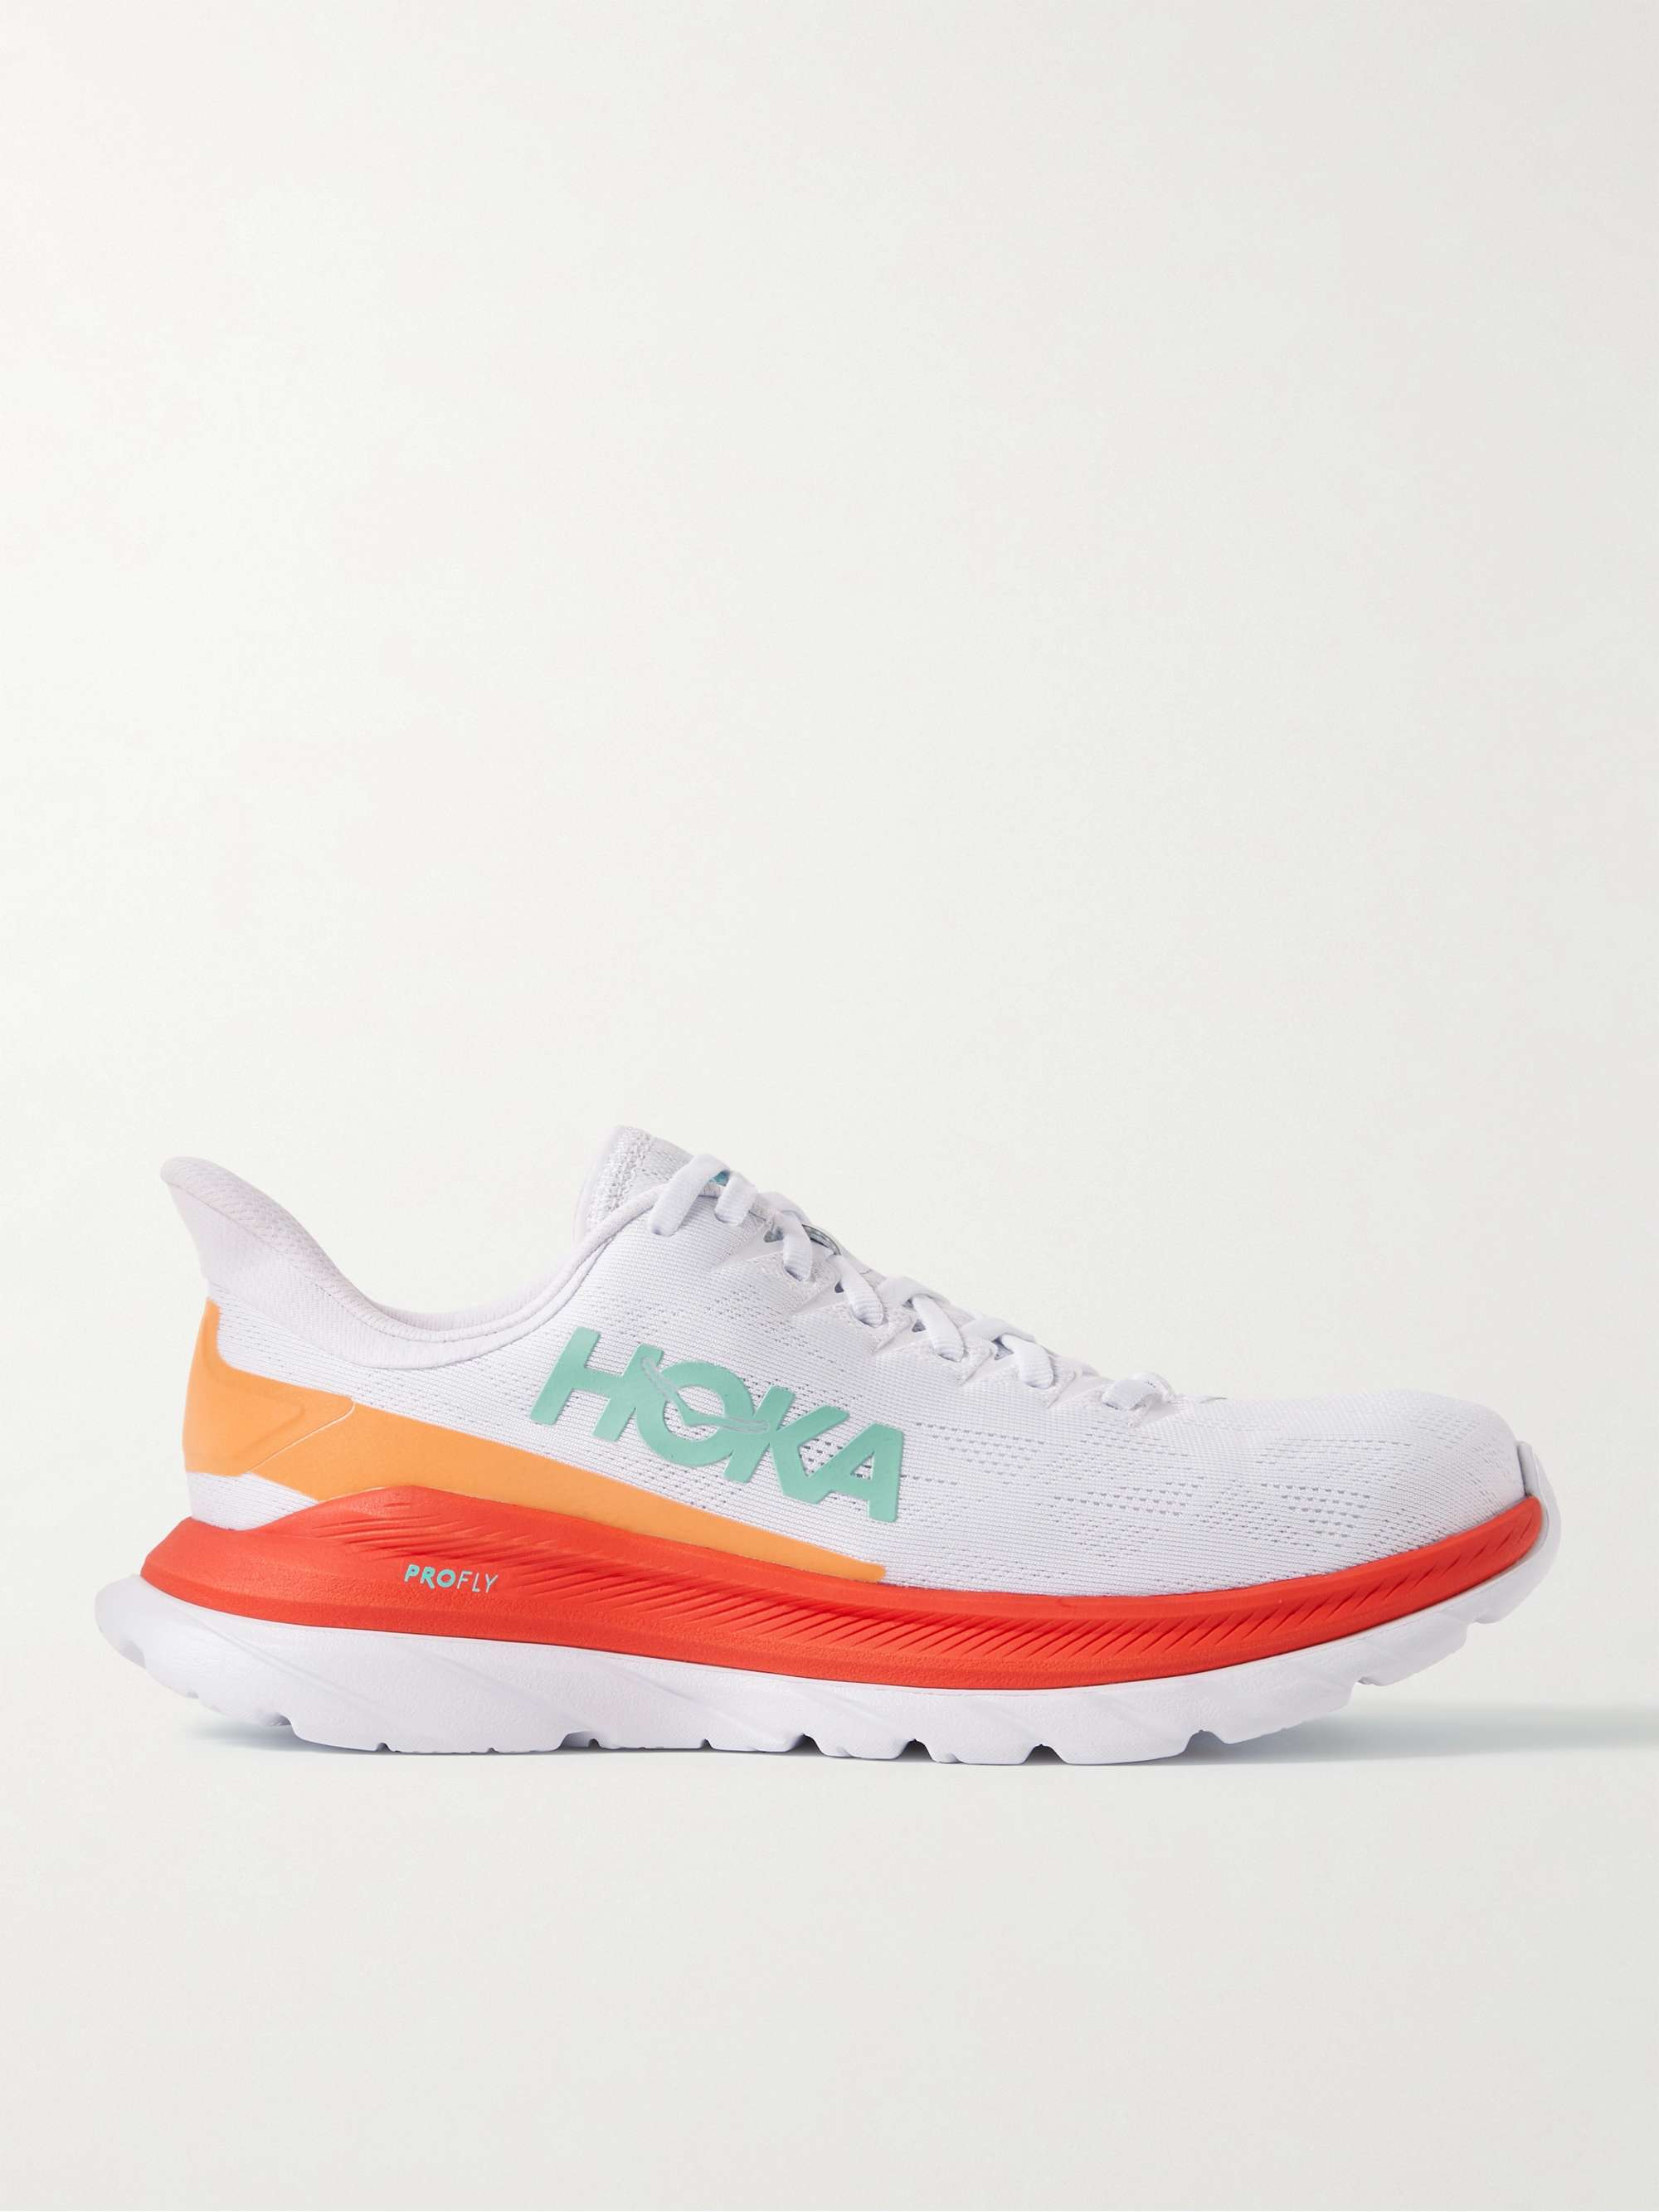 HOKA ONE ONE Mach 4 Rubber-Trimmed Mesh Running Sneakers